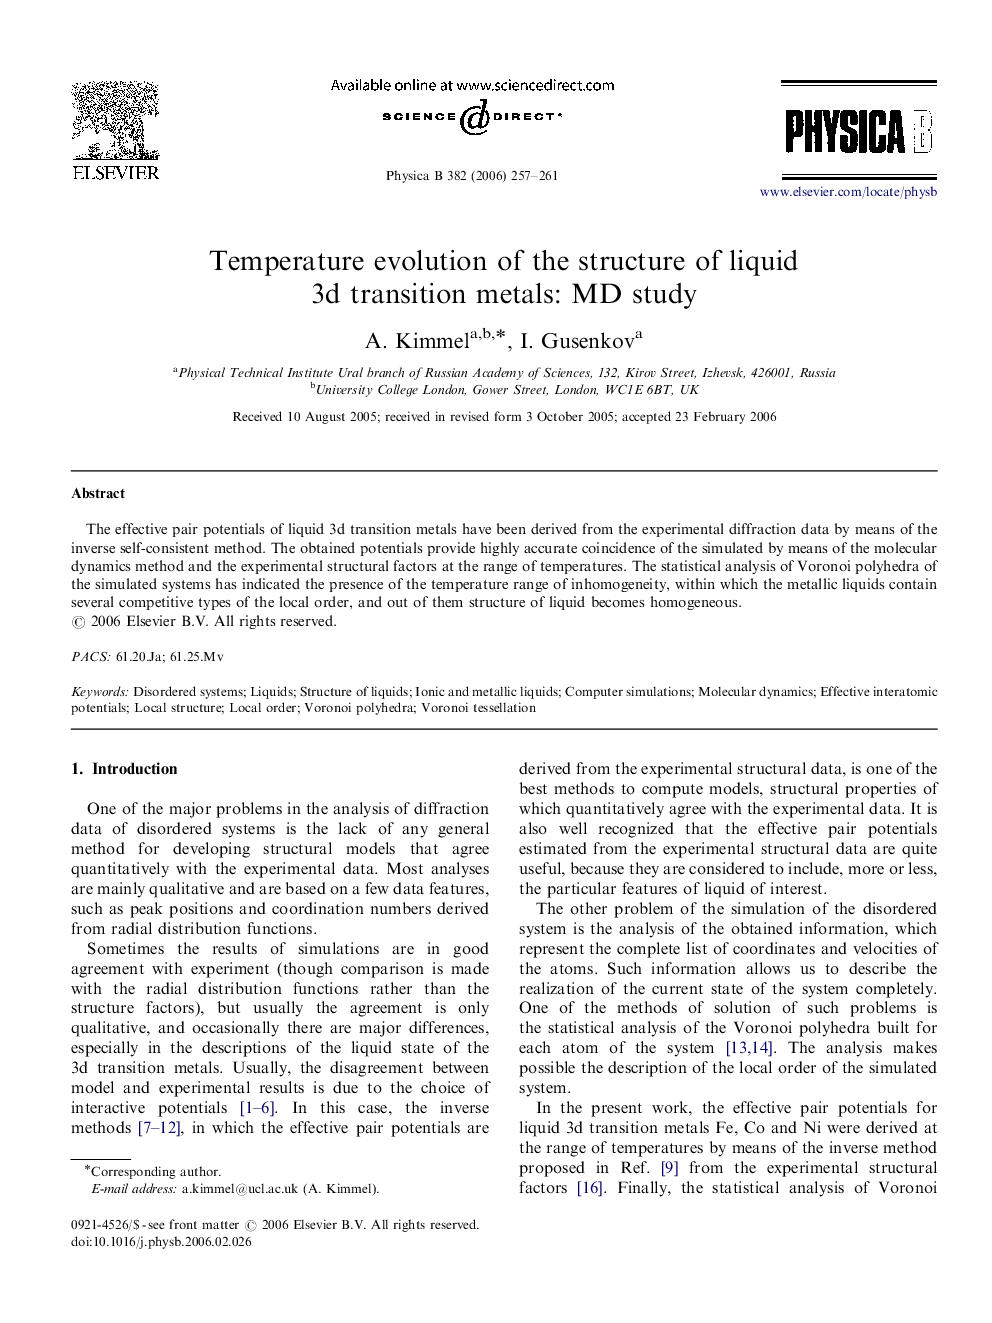 Temperature evolution of the structure of liquid 3d transition metals: MD study